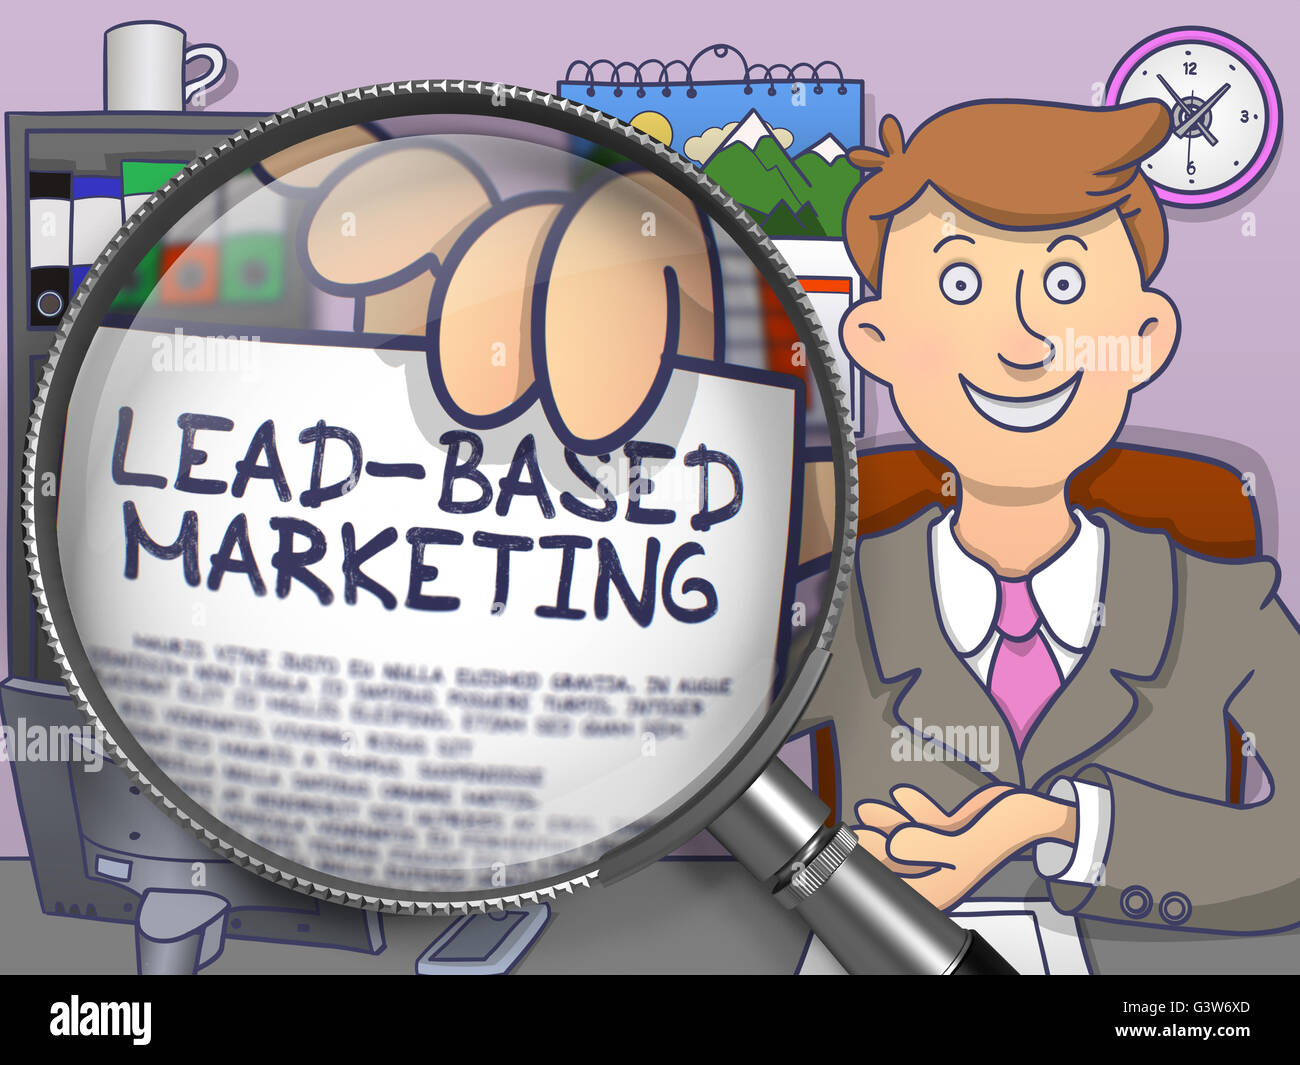 Lead-Based Marketing through Magnifier. Doodle Style. Stock Photo